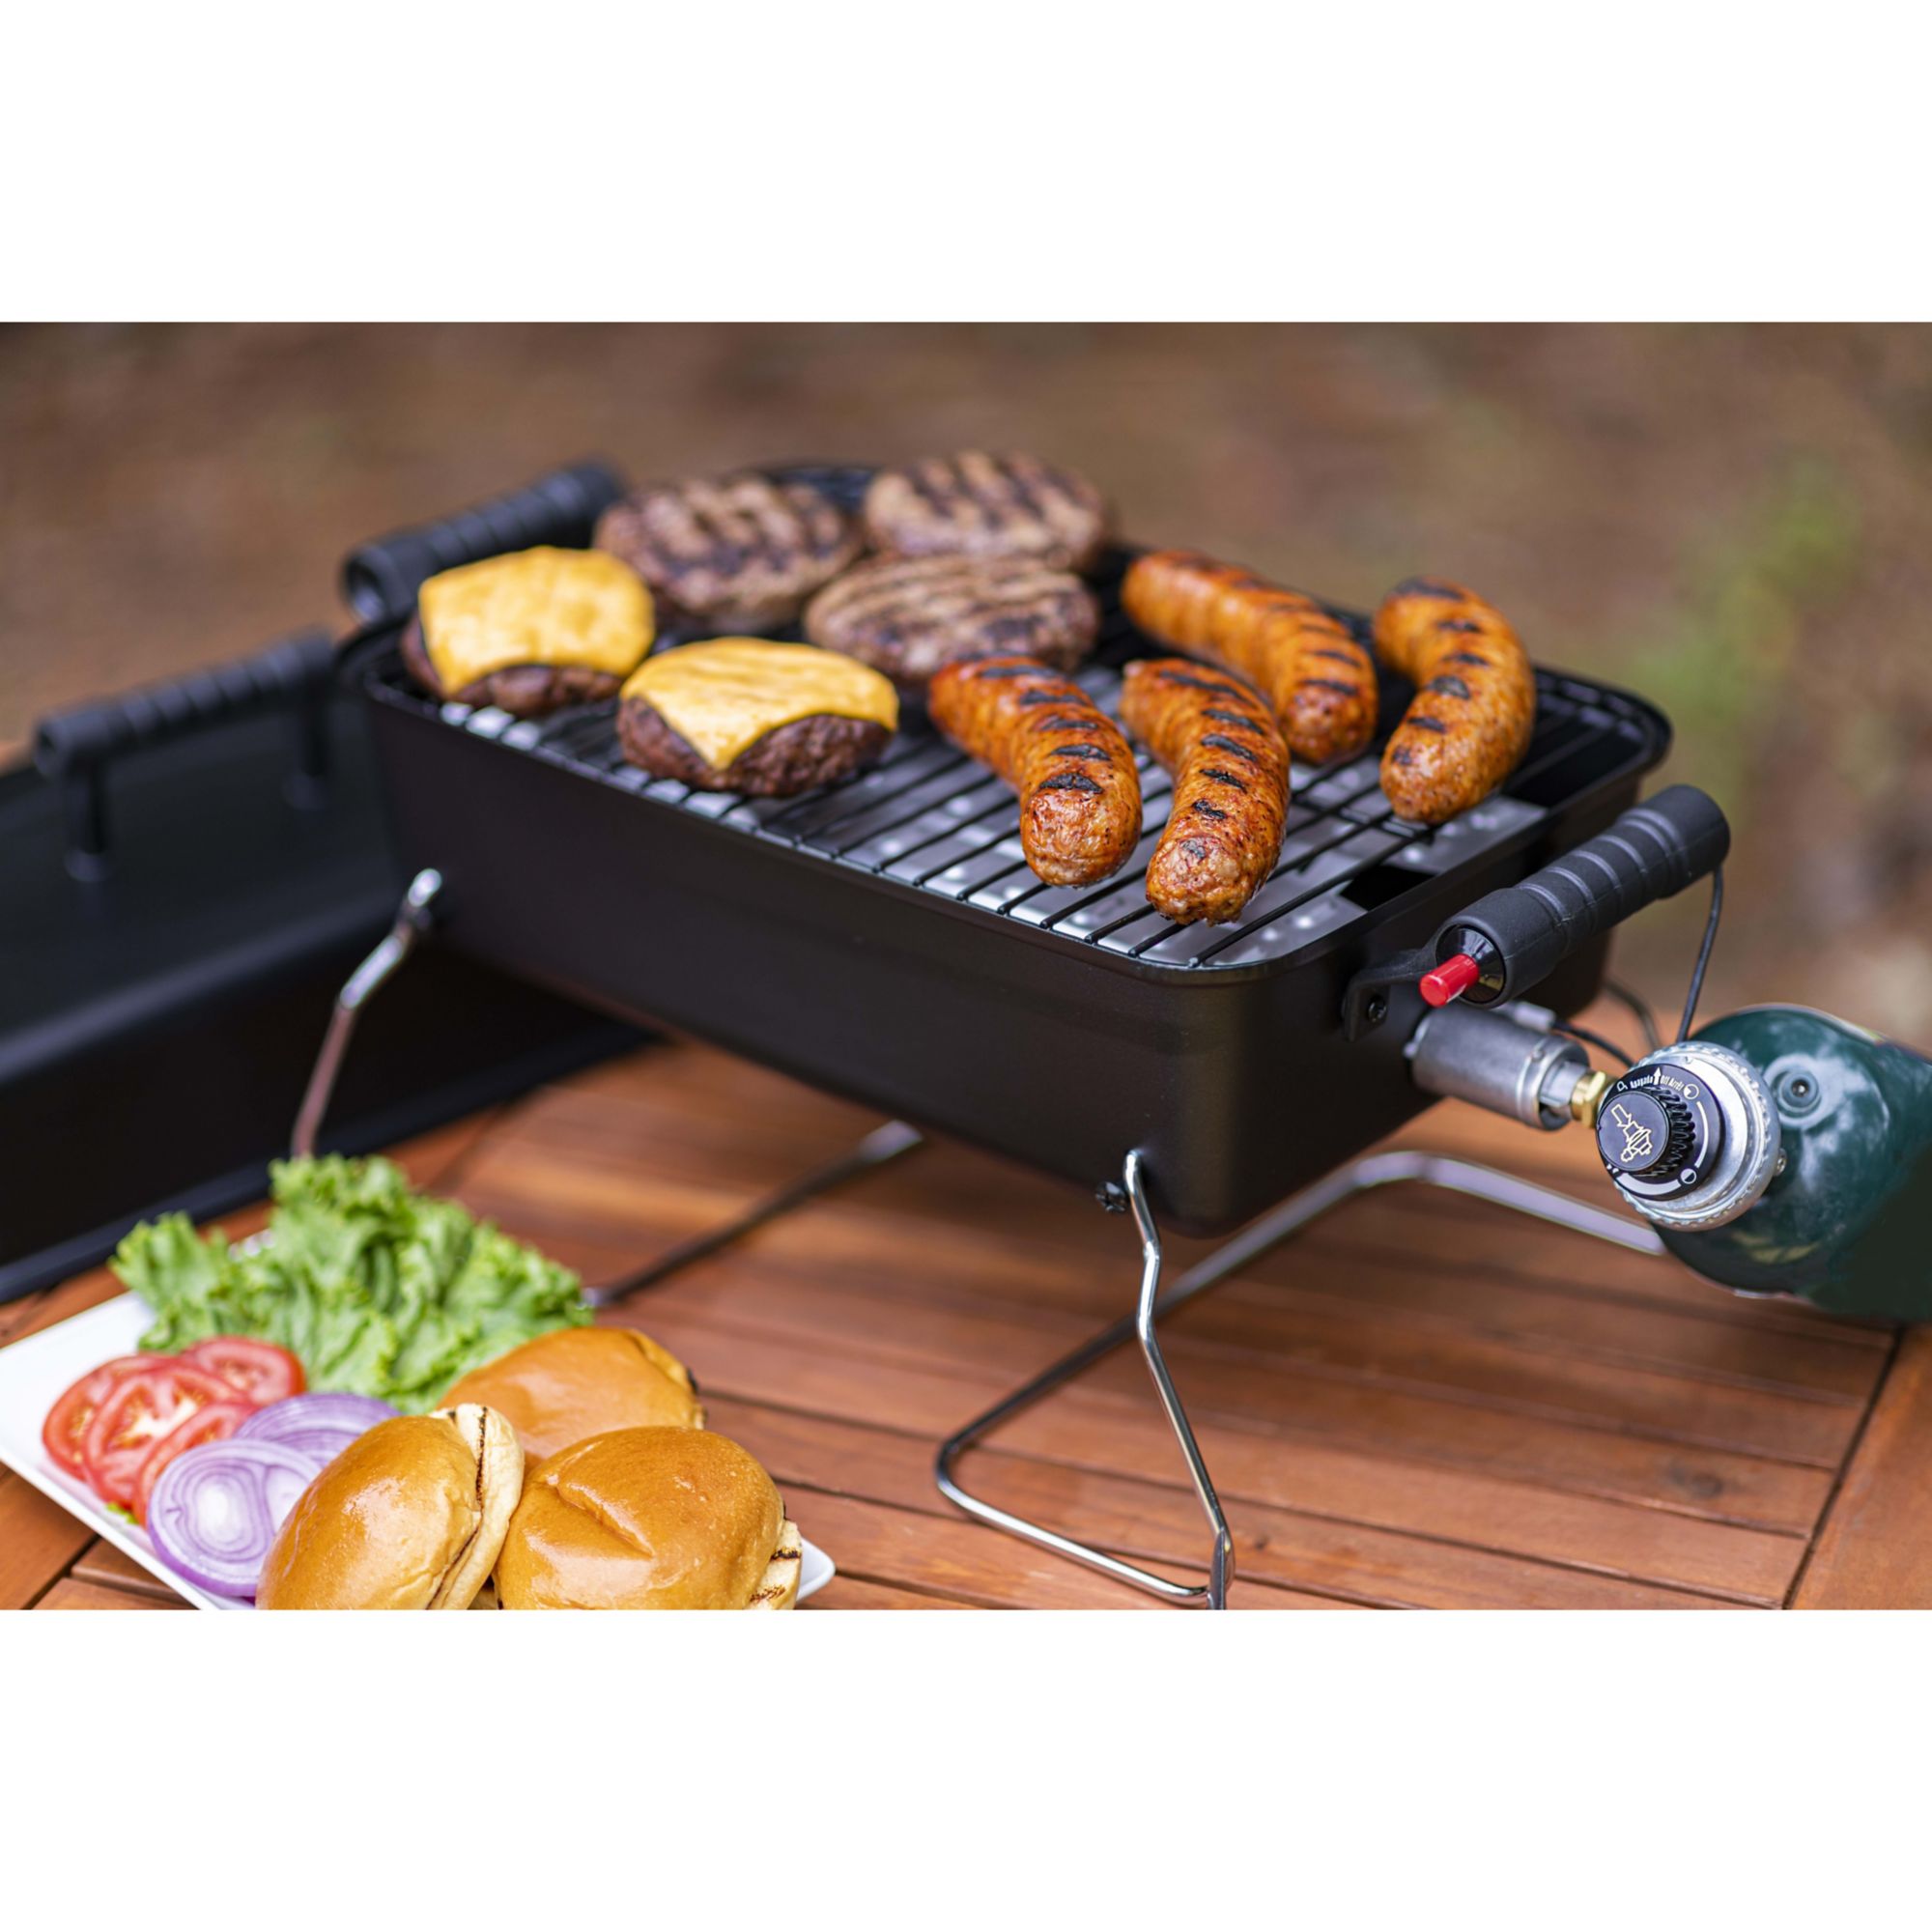 Char-Broil 190 Deluxe Portable Gas Grill